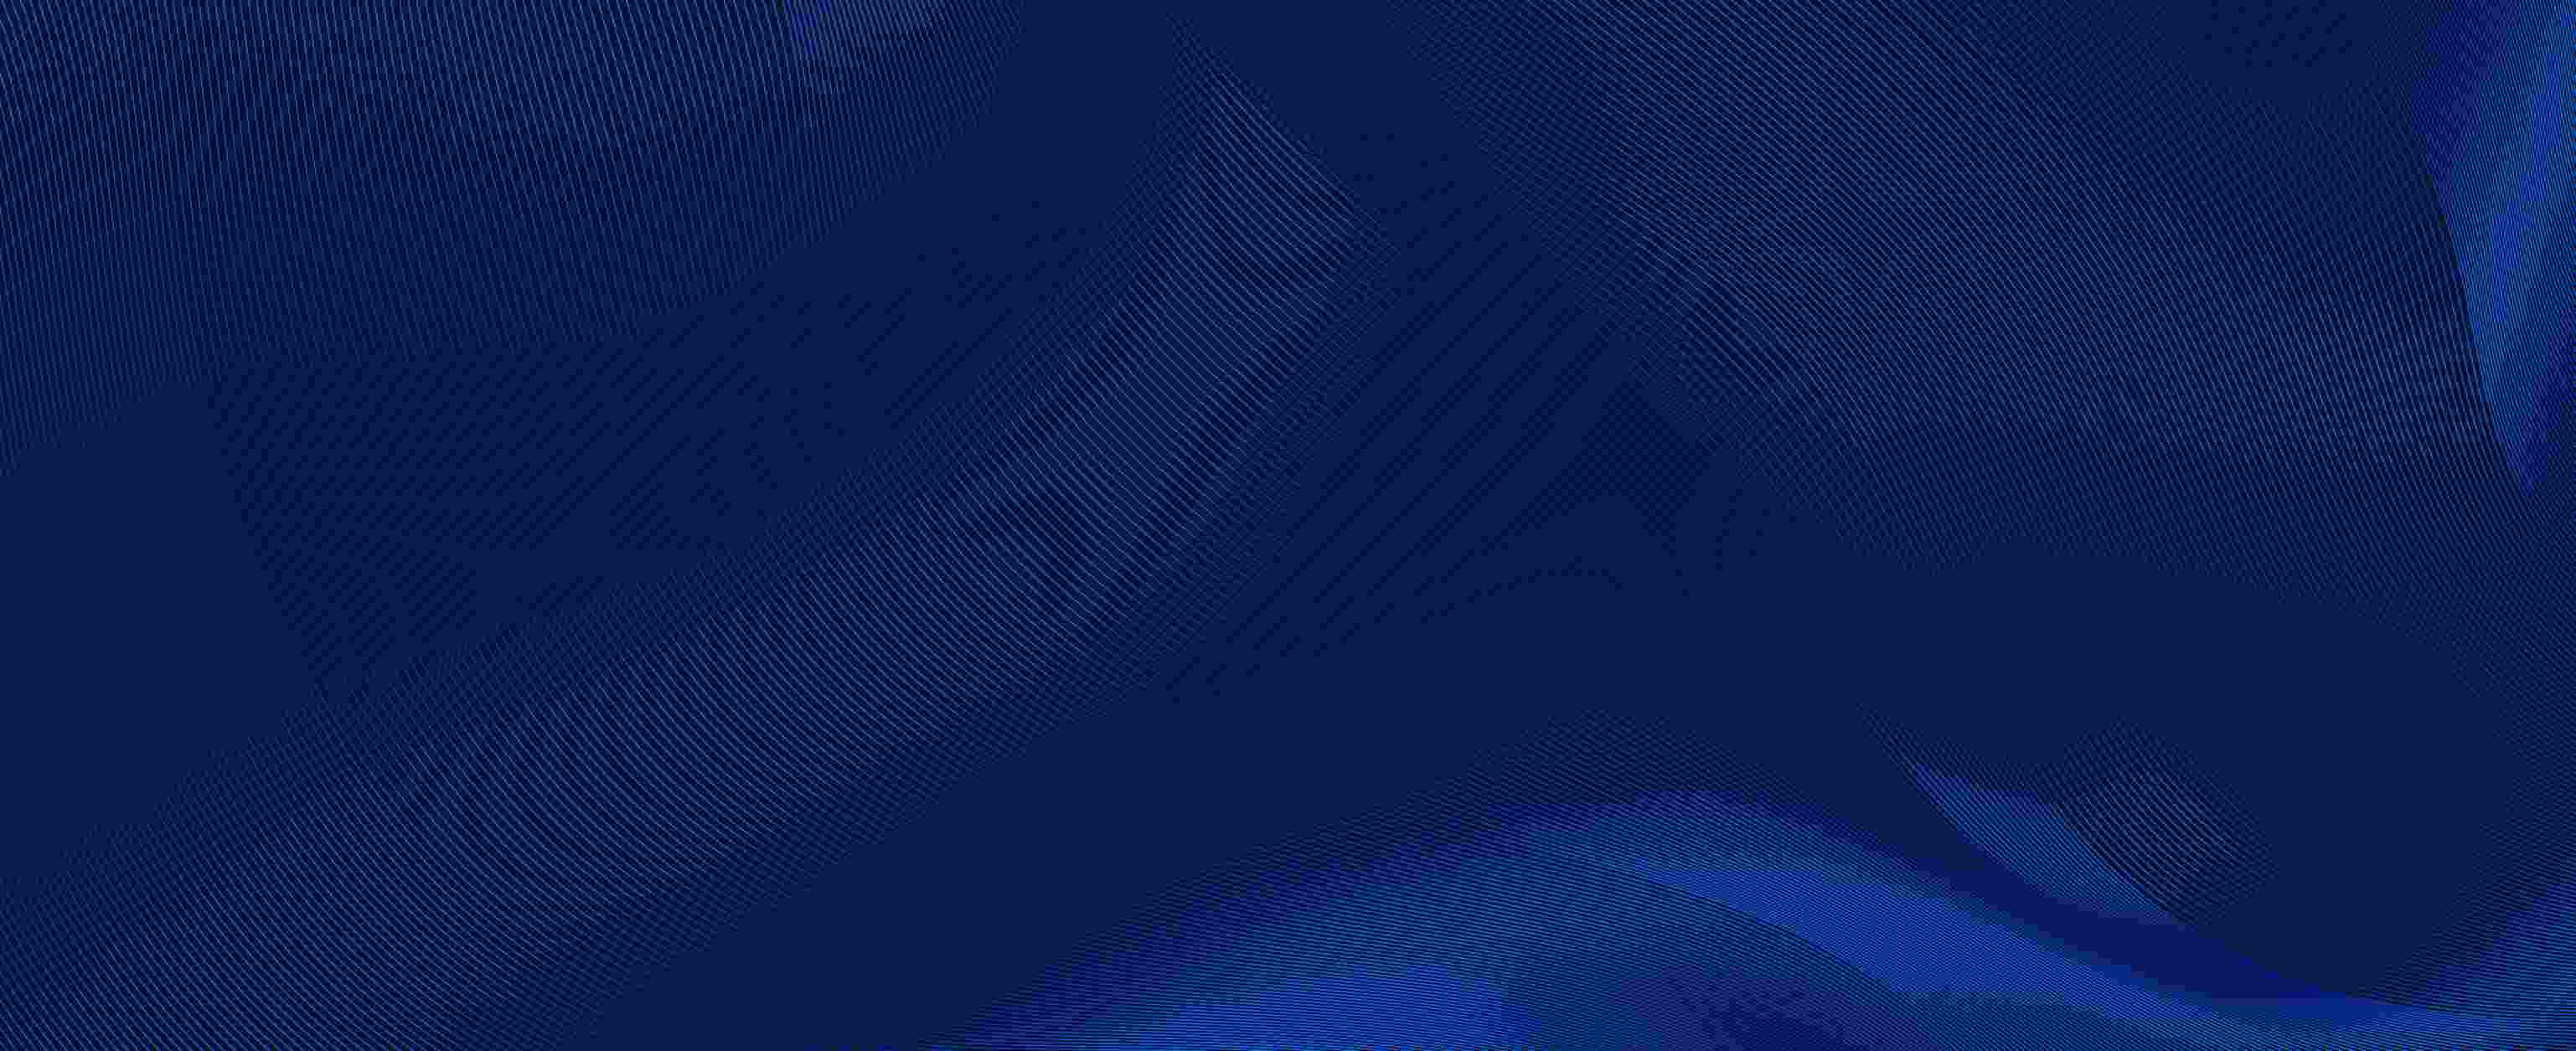 Blue background with digital waves